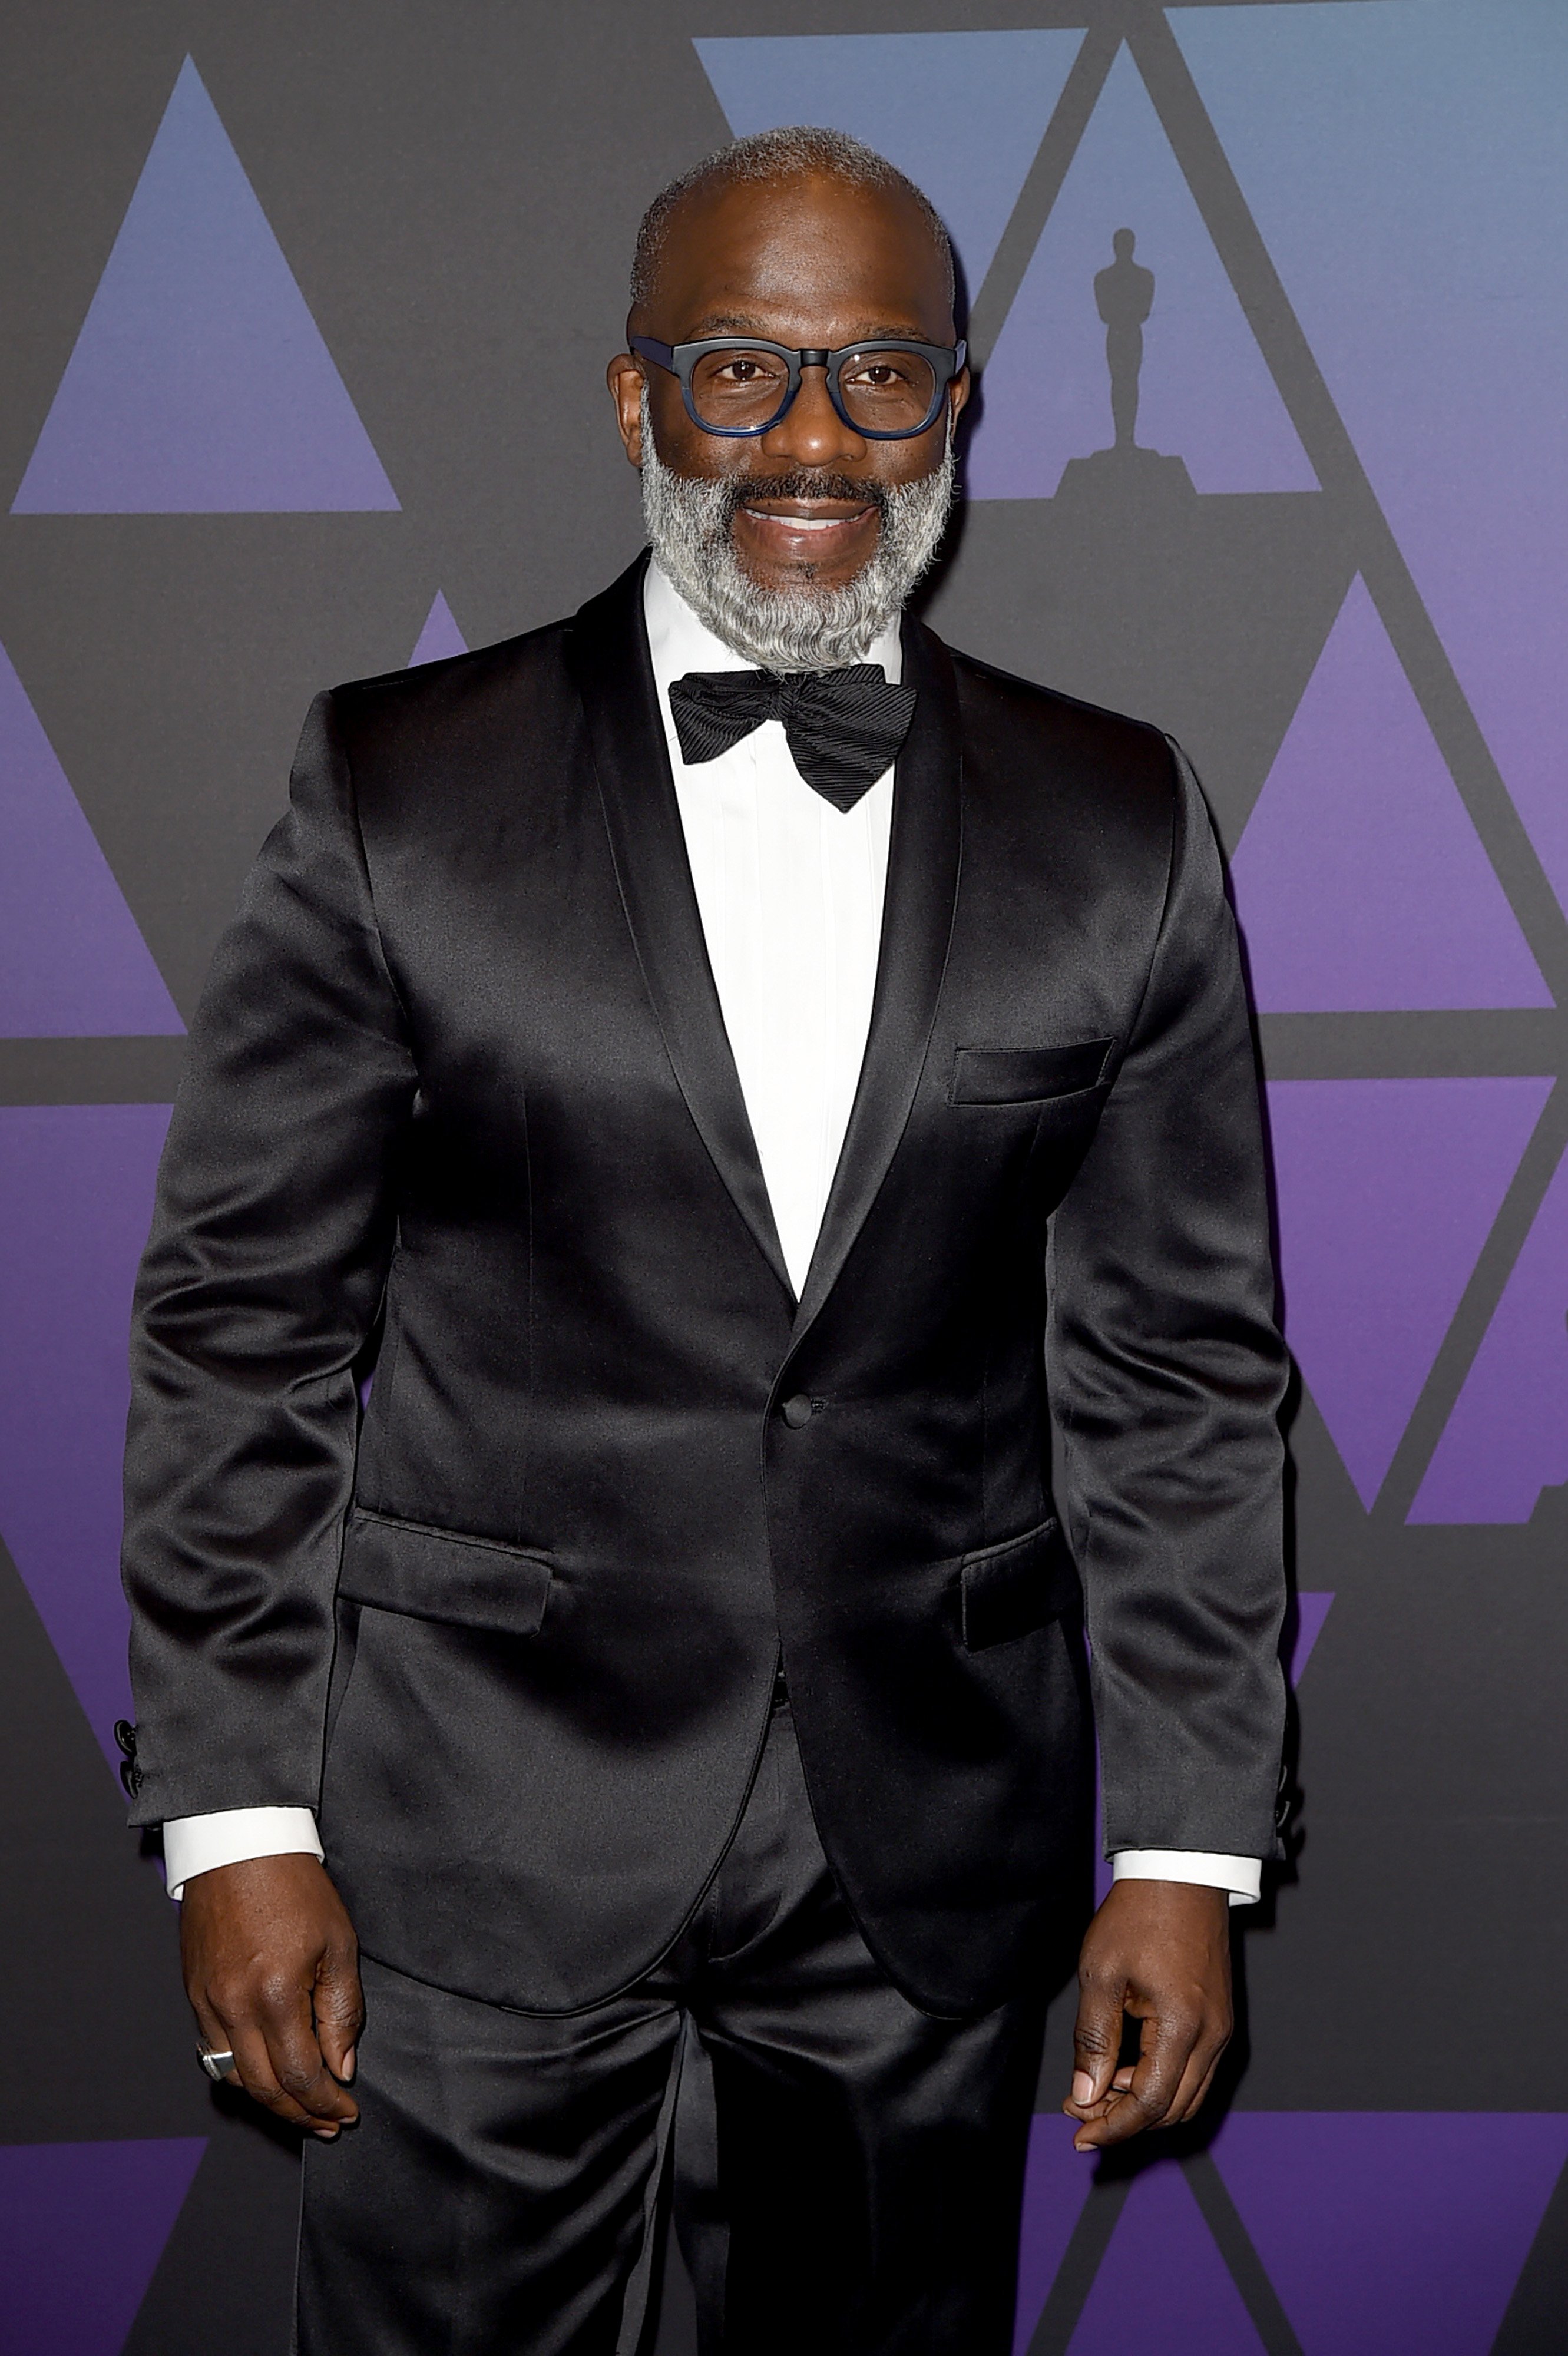 Bebe Winans at the 10th Annual Governor's Ball of the Academy of Motion Picture Arts and Sciences in November 2018. | Photo: Getty Images